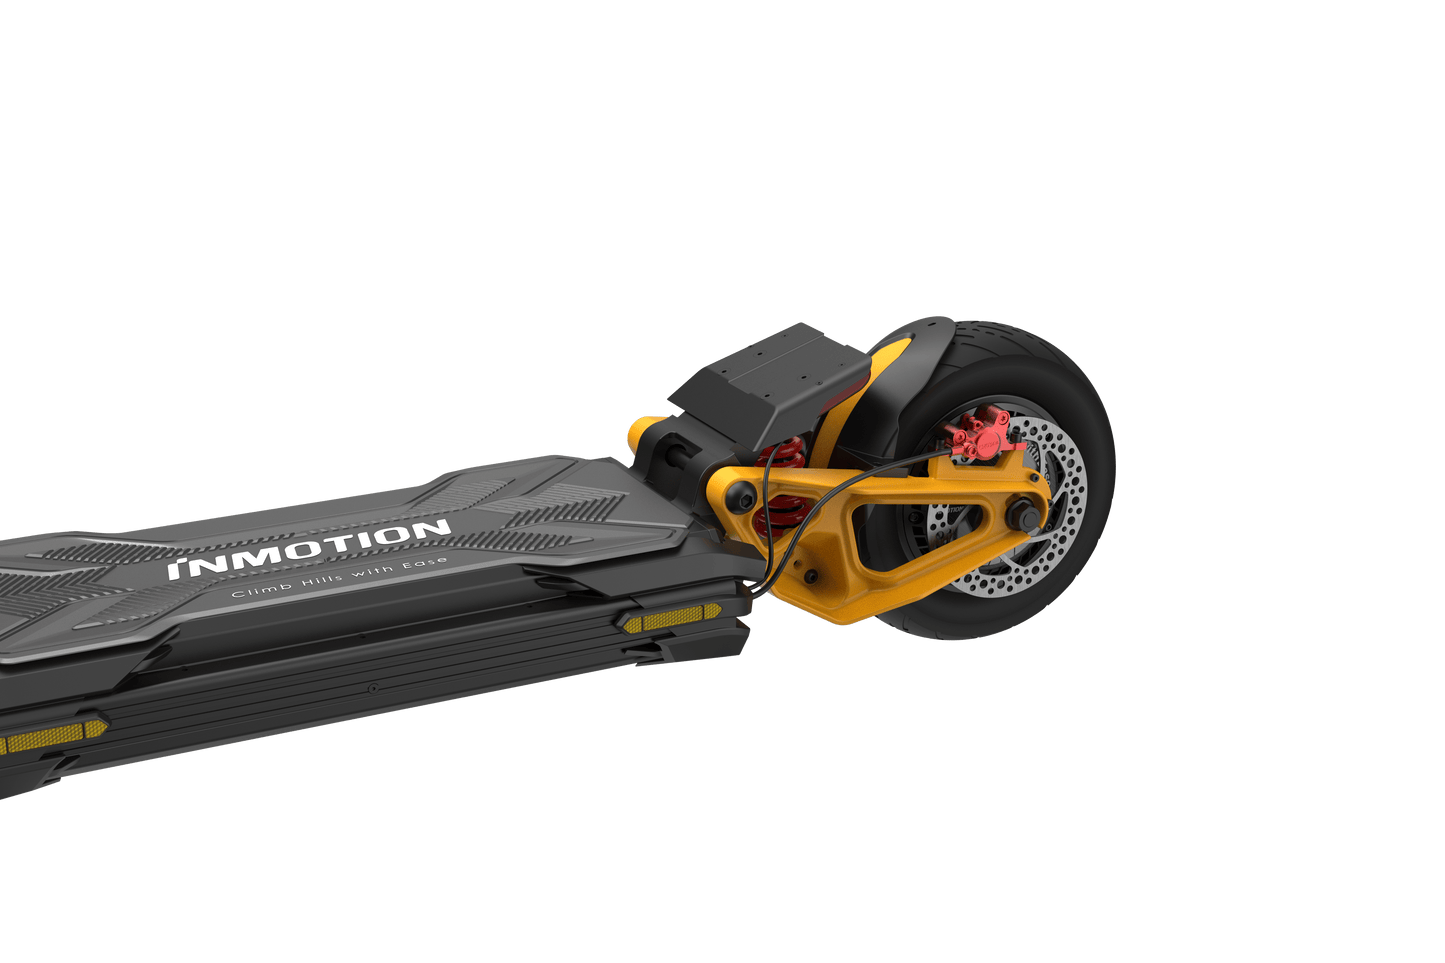 Inmotion Riding Scooters Inmotion RS Super Scooter